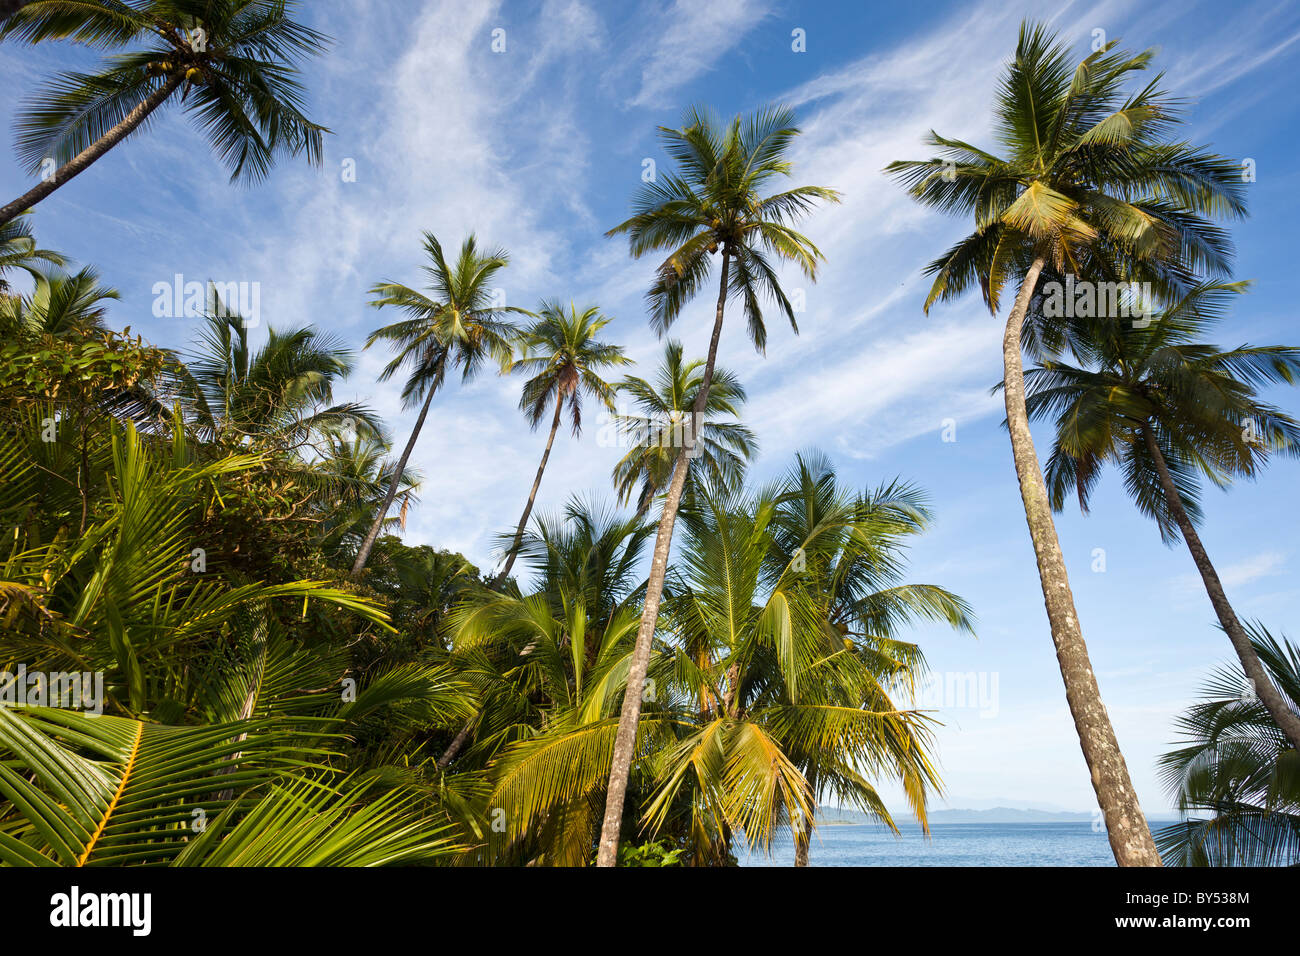 Palm trees frame the Caribbean Sea at the tropical forest wildlife ...